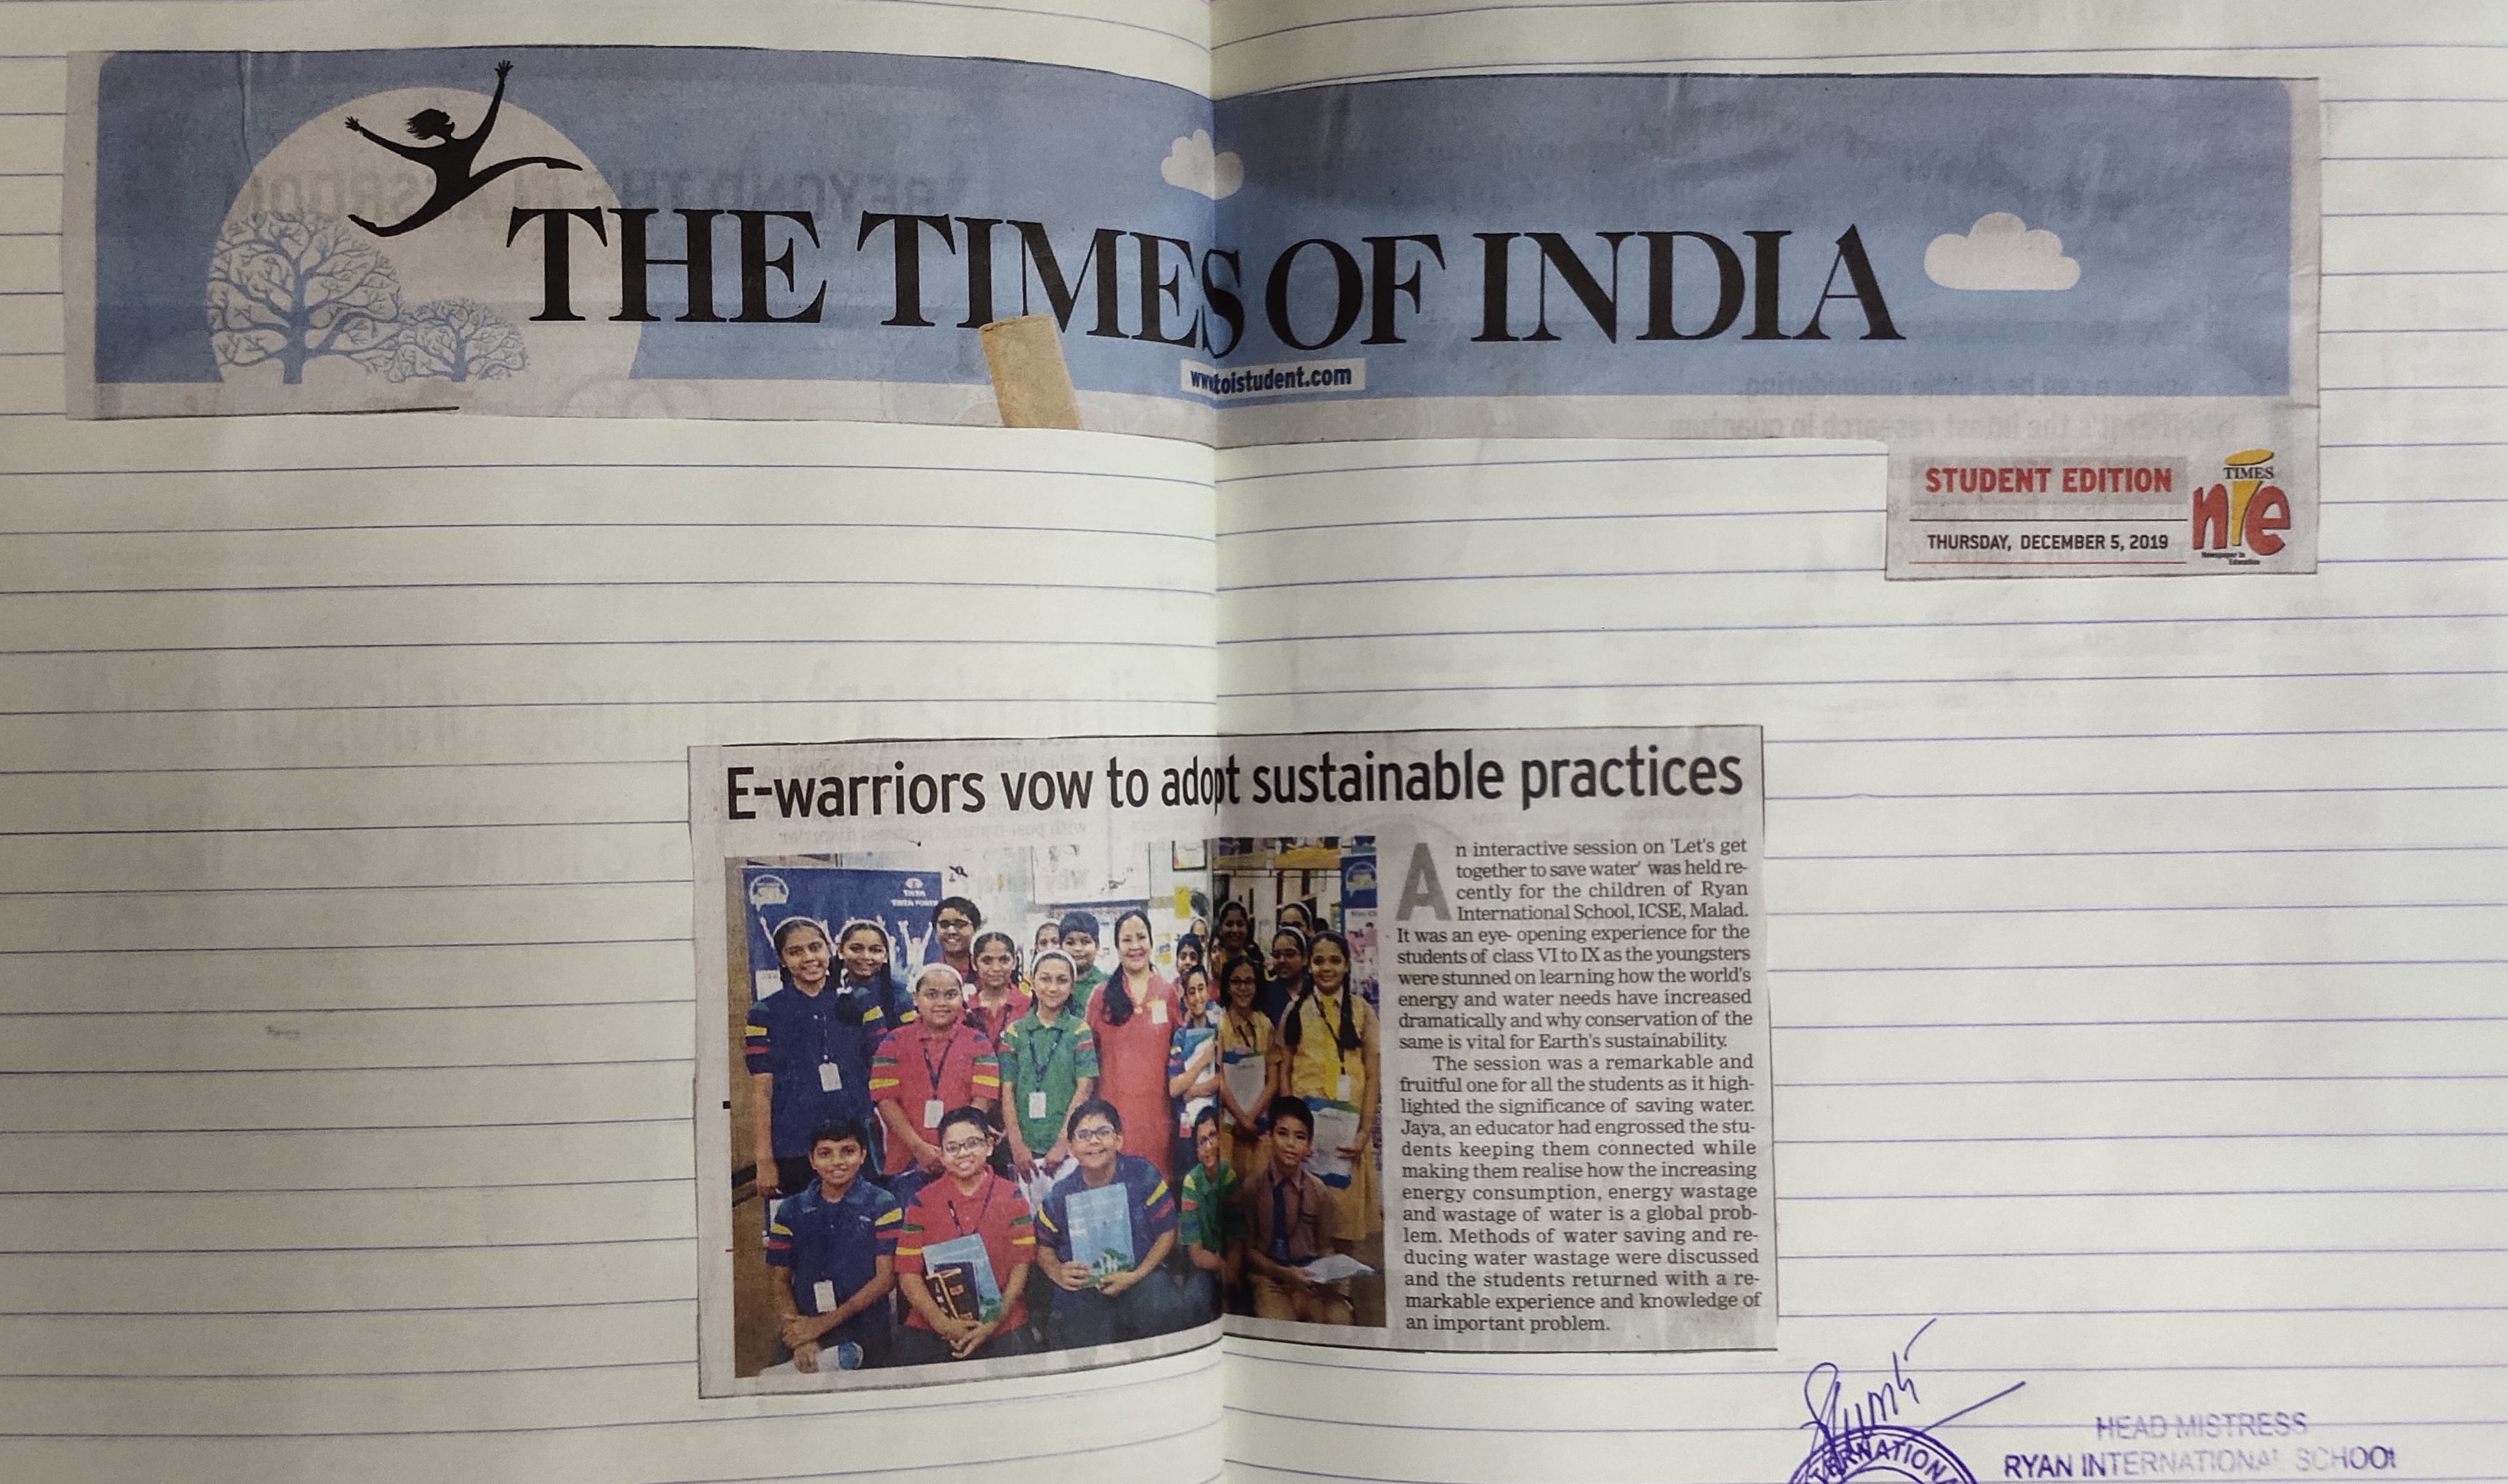 An article under the name “Interactive session with Ms. Arohi Pandit - First woman pilot” was published in the Times of India